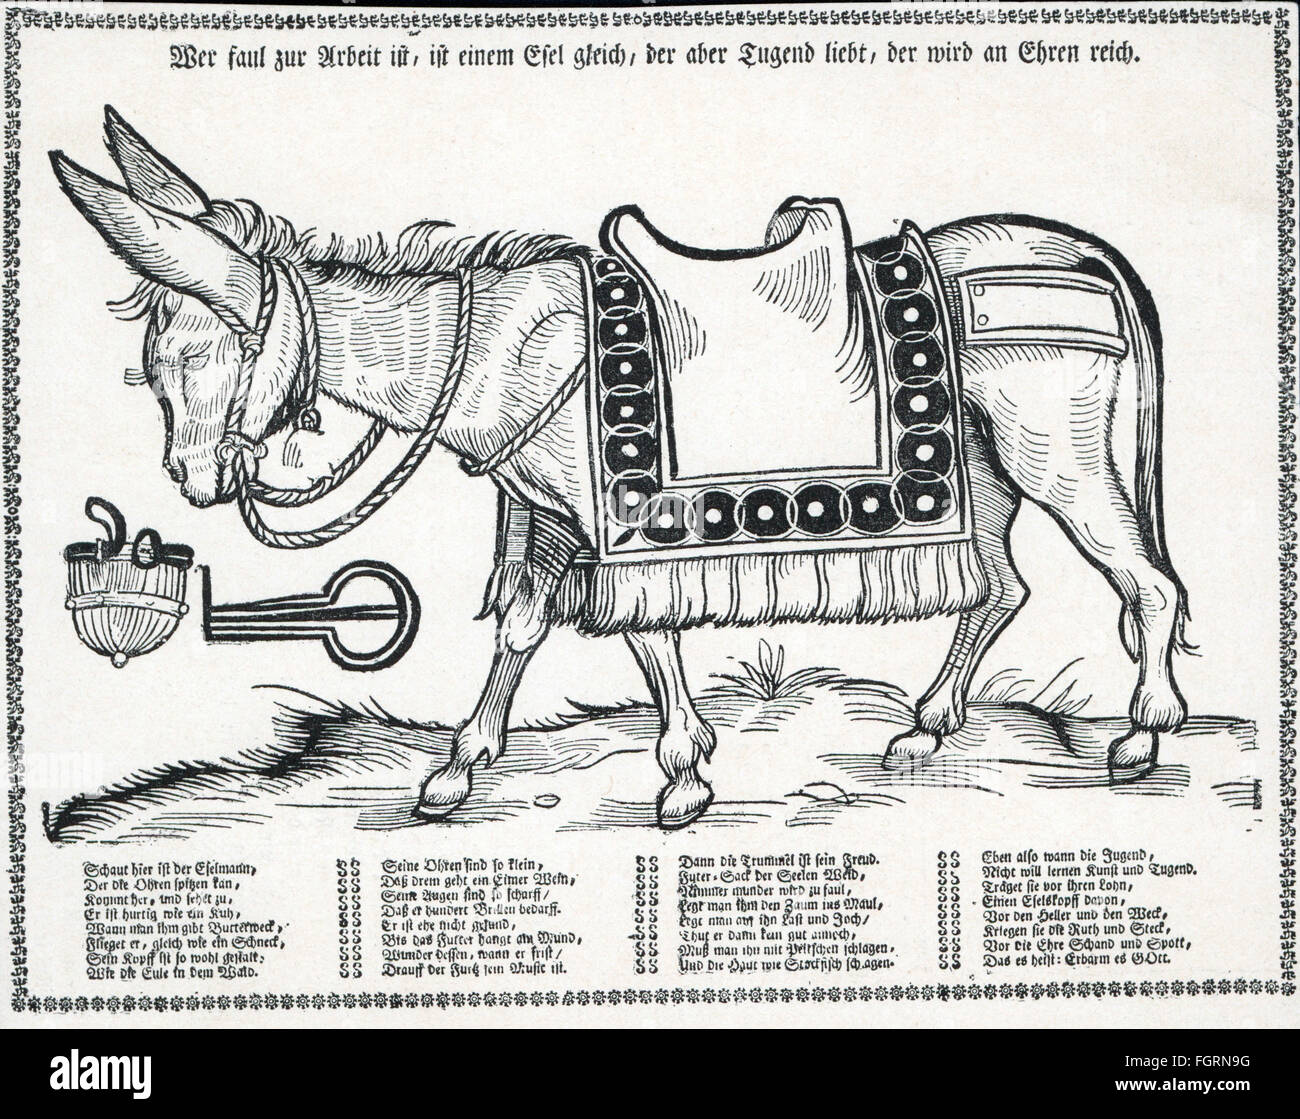 pedagogy,teaching aids,didactic pictorial broadsheet with caricature of a donkey as reminder to children,flyer,17th century,Germanisches Nationalmuseum(National Museum of Germanic History),Nuremberg,17th century,graphic,graphics,Germany,didactics,animal,animals,donkey,donkeys,saddle,saddles,idleness,laziness,symbol,symbols,premonition,premonitions,pedagogy,paedagogy,education,teaching aids,audiovisual aids,caricature,caricatures,reminder,reminder letter,reminders,reminder letters,children,child,kids,kid,flyer,flier,leaf,Additional-Rights-Clearences-Not Available Stock Photo